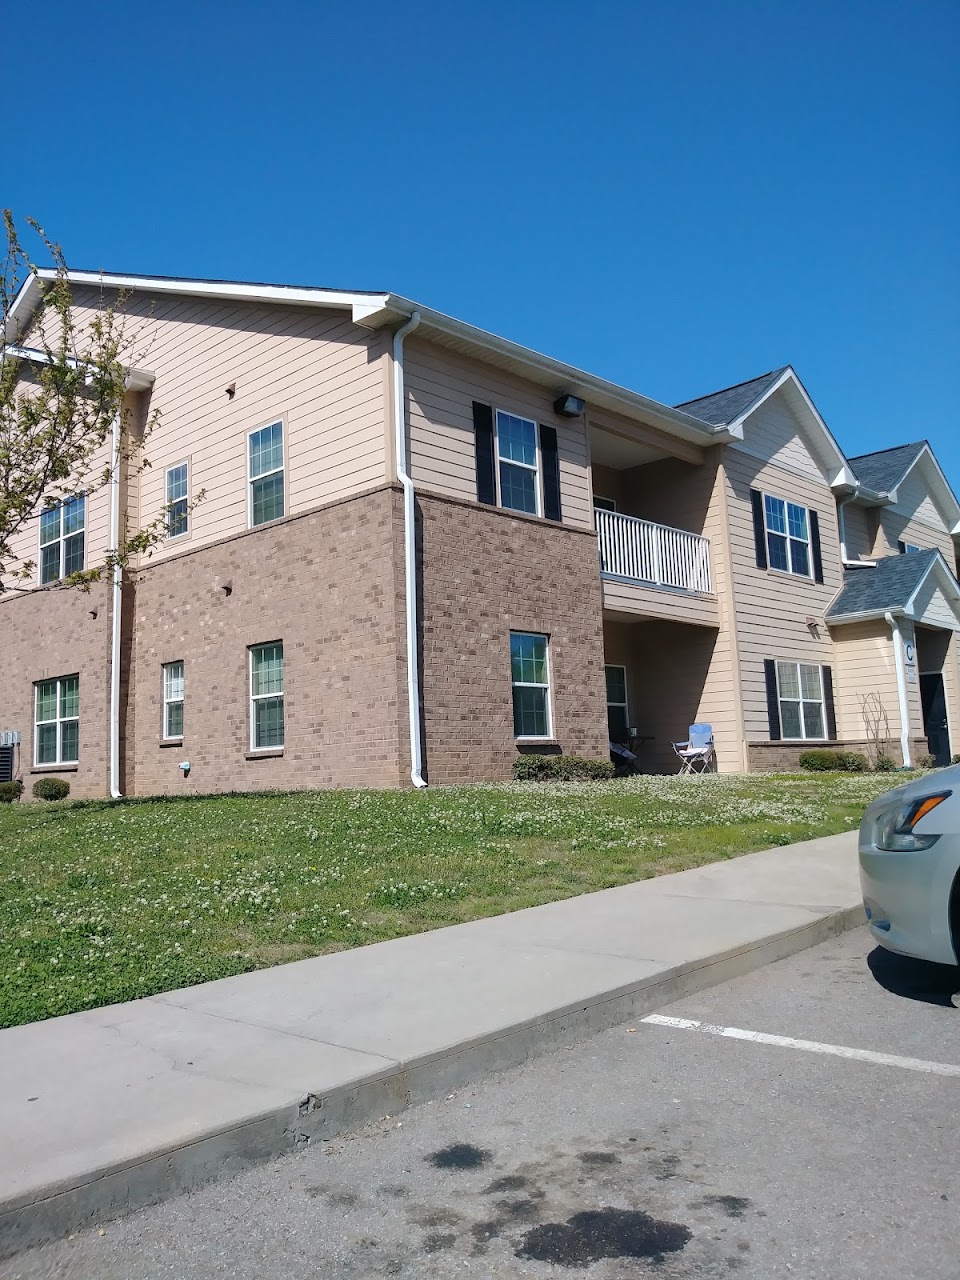 Photo of ELK WAY APTS. Affordable housing located at 114 MARTY RD FAYETTEVILLE, TN 